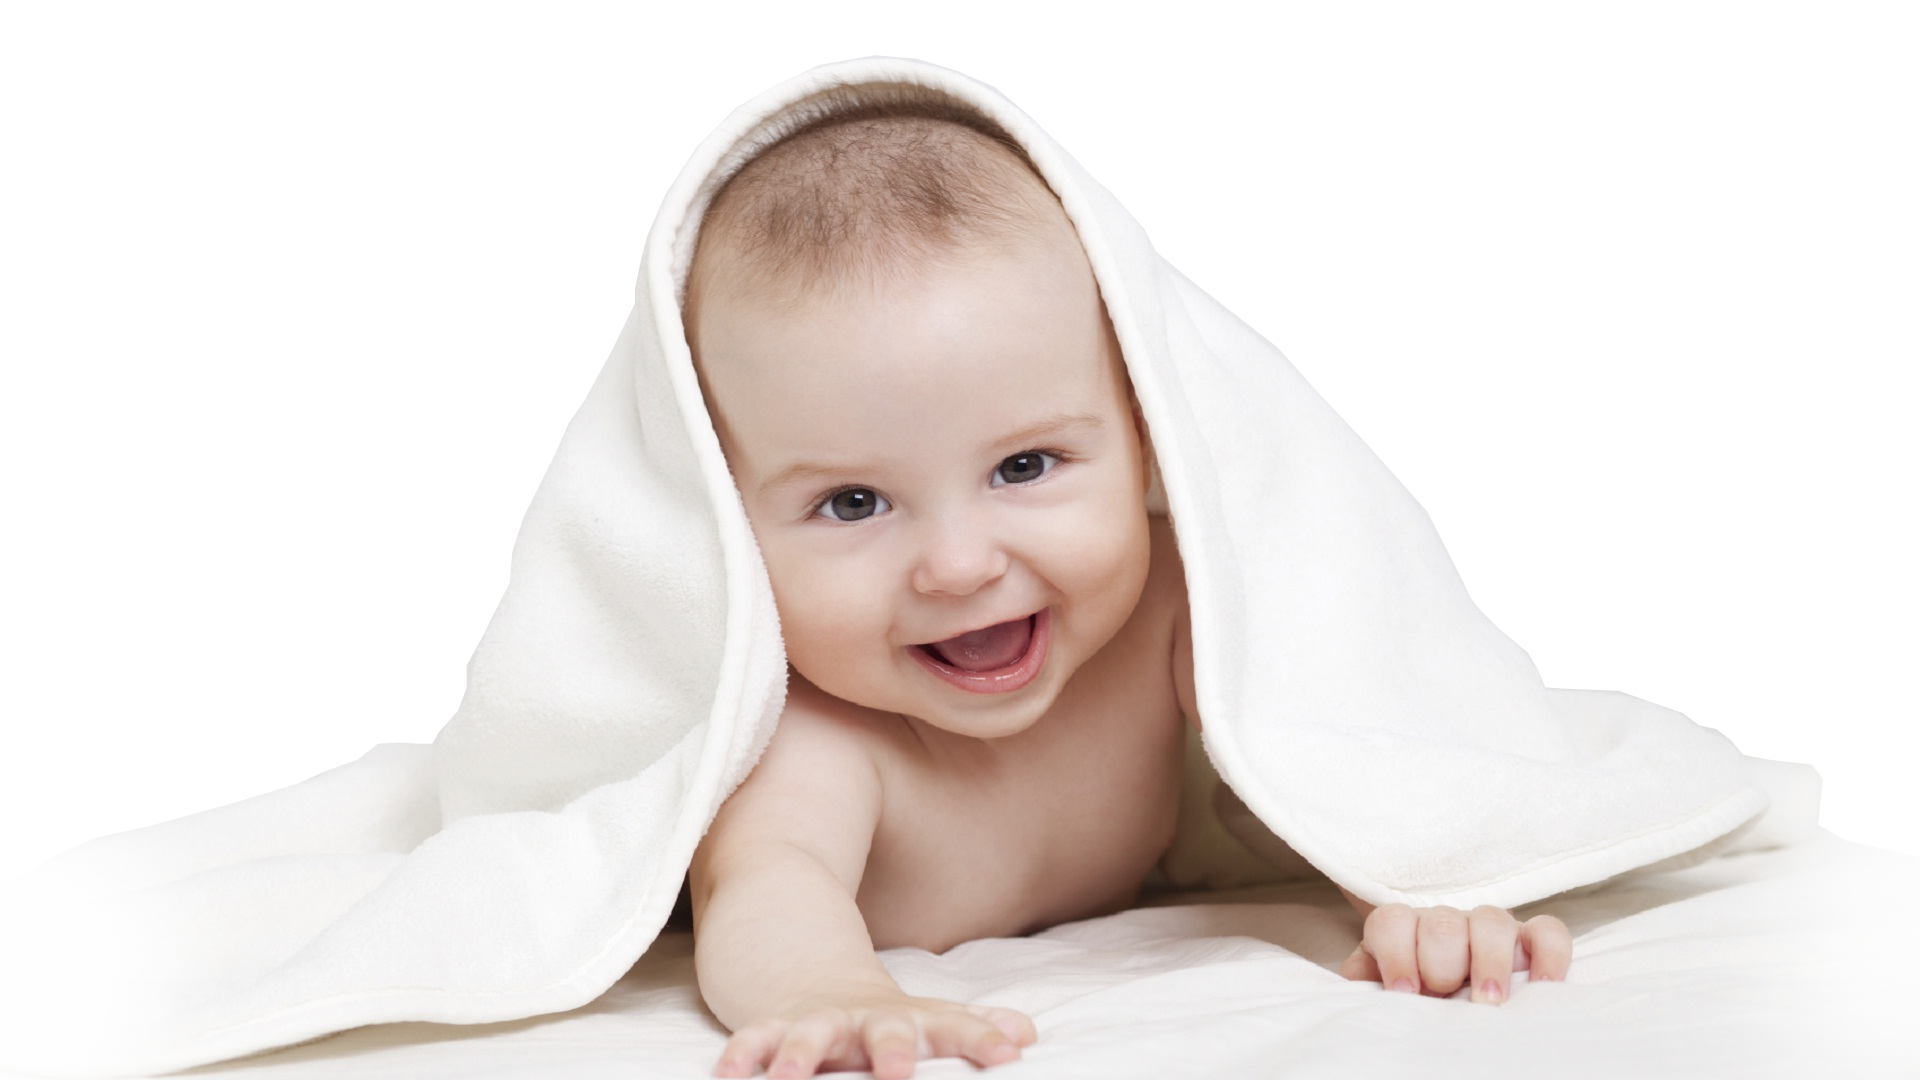 Baby images hd